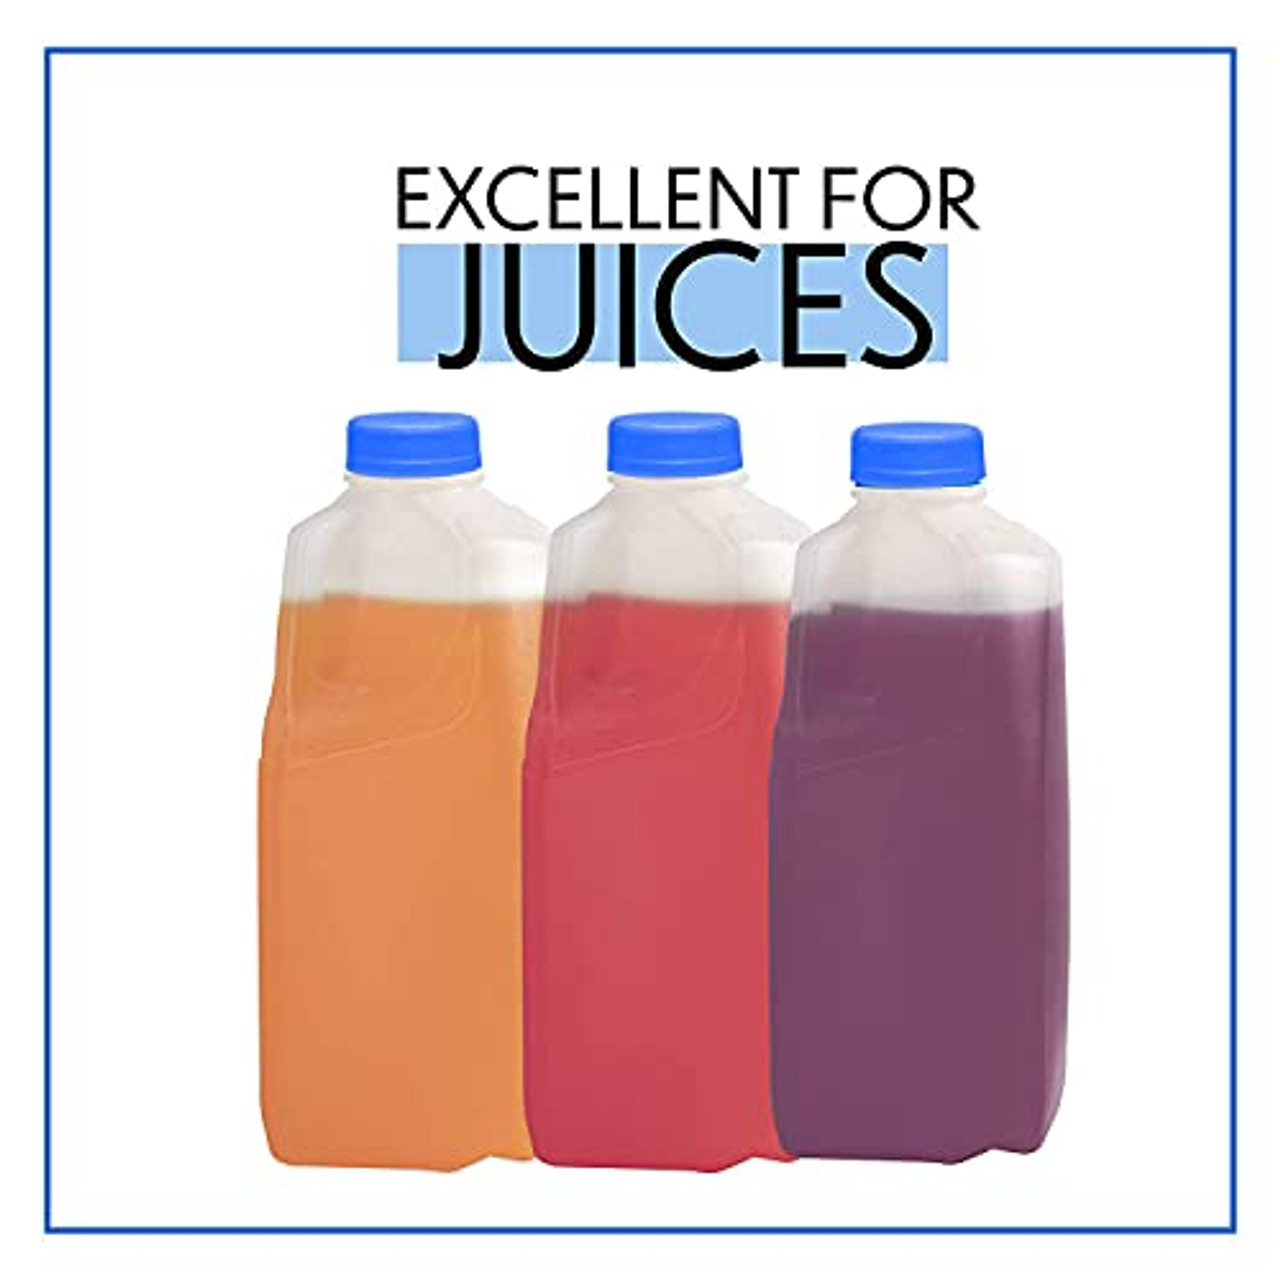 6 Empty Plastic Juice Bottles with Lids, 32oz Juice Drink Containers with  Caps